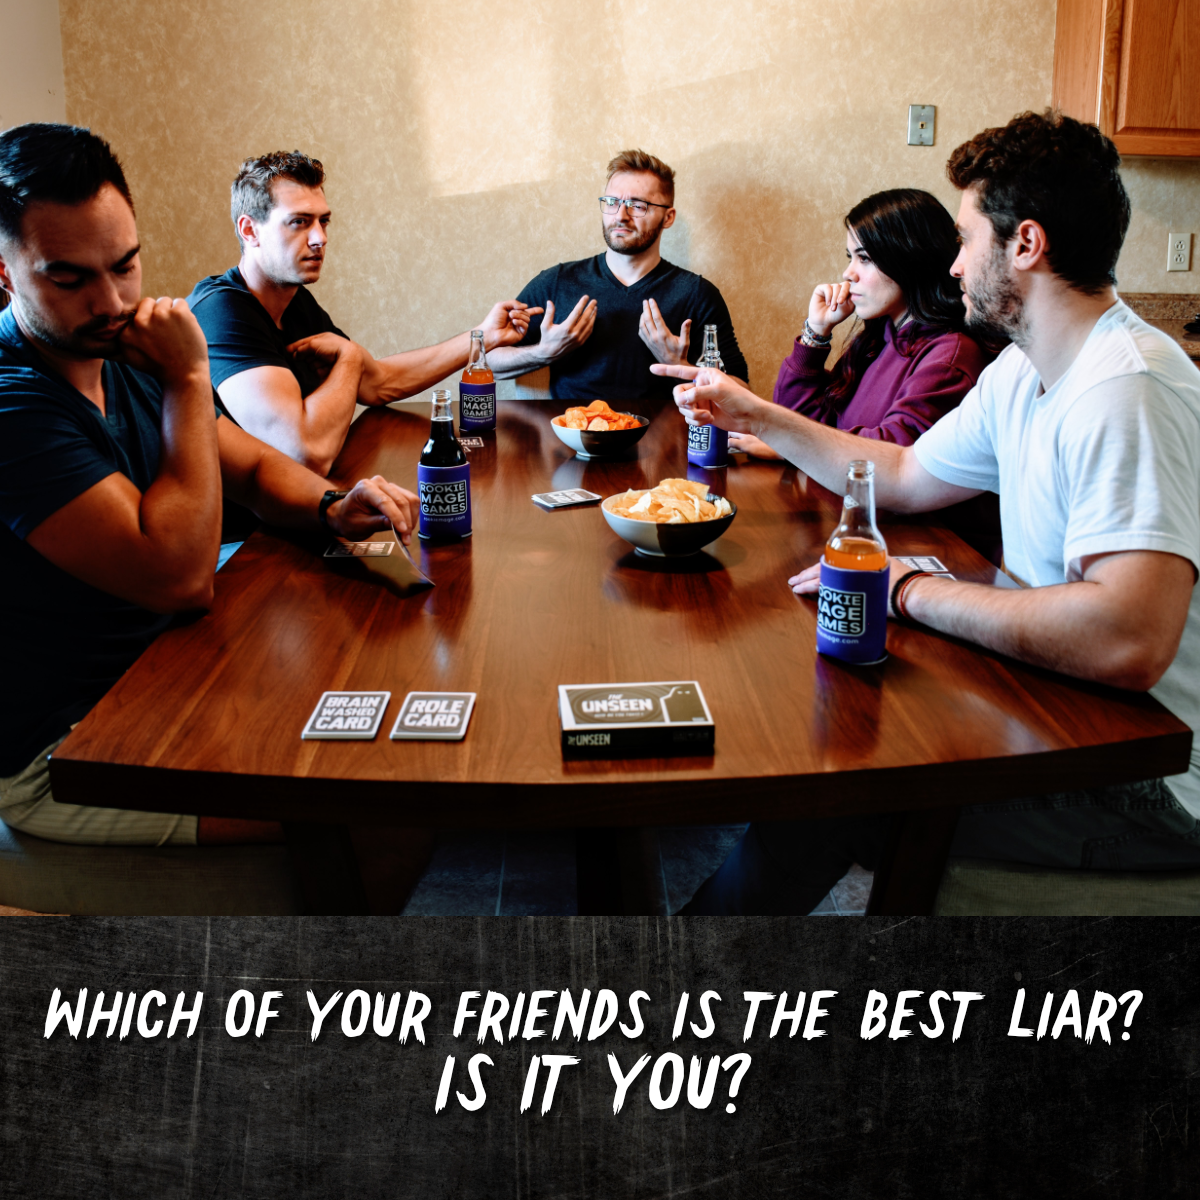 Which of your friends is the best liar? Is it you?